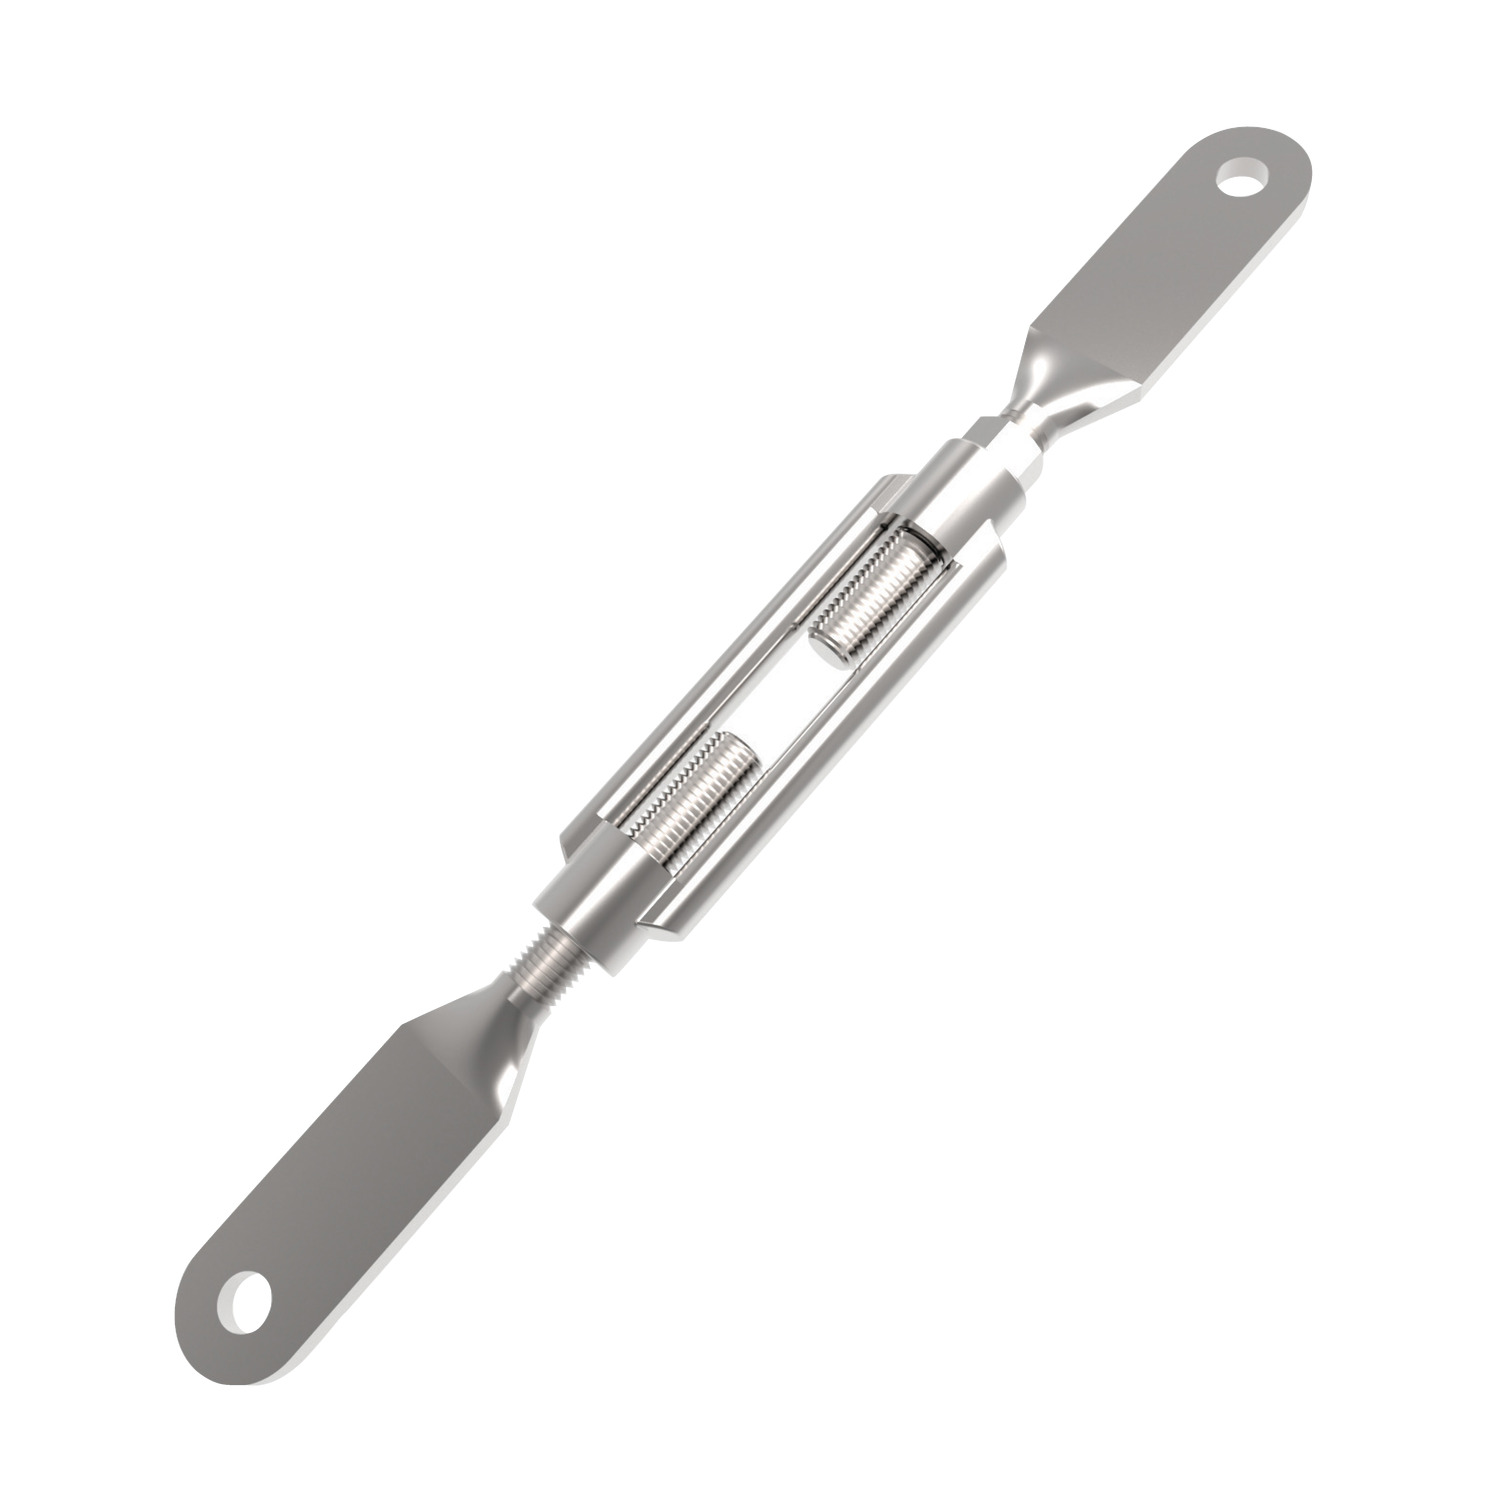 R3838.008-ZP Plain End Turnbuckles - steel - M 8-110 Not to be used for lifting unless SWL marked.